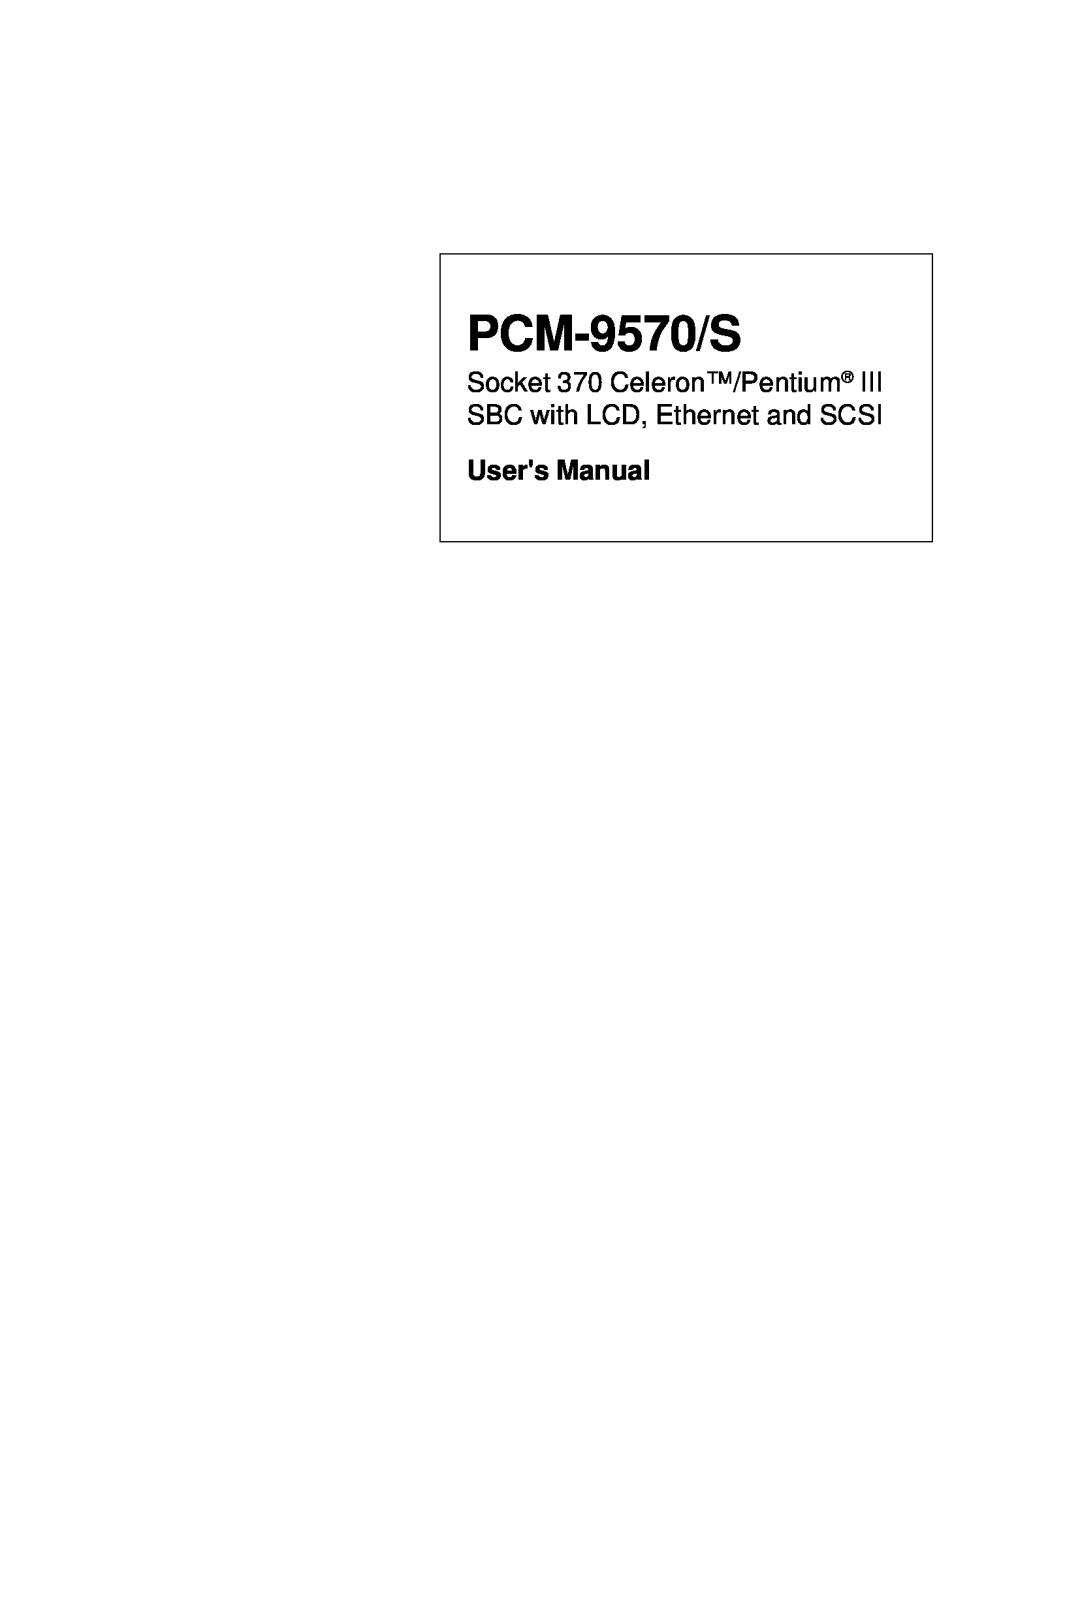 Advantech 2006957006 5th Edition user manual PCM-9570/S, Socket 370 Celeron/Pentium III SBC with LCD, Ethernet and SCSI 